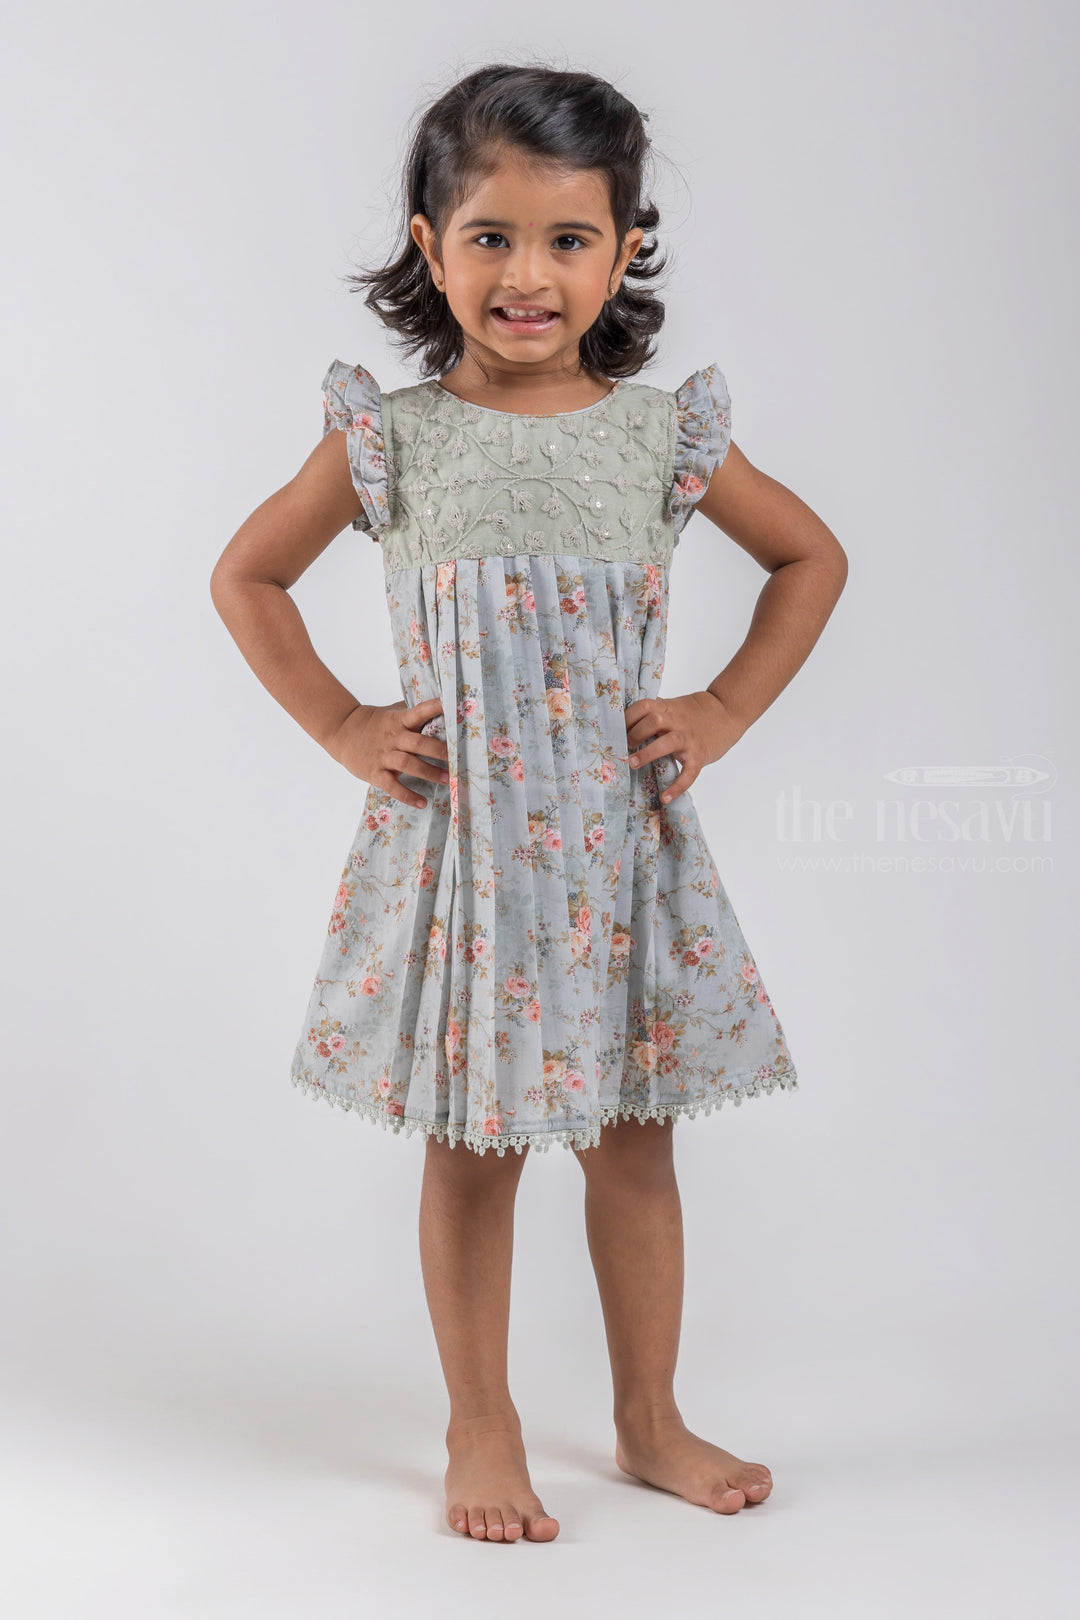 The Nesavu Baby Cotton Frocks Gorgeous Green Floral Printed Pleated Soft Cotton Frock For Baby Girls psr silks Nesavu